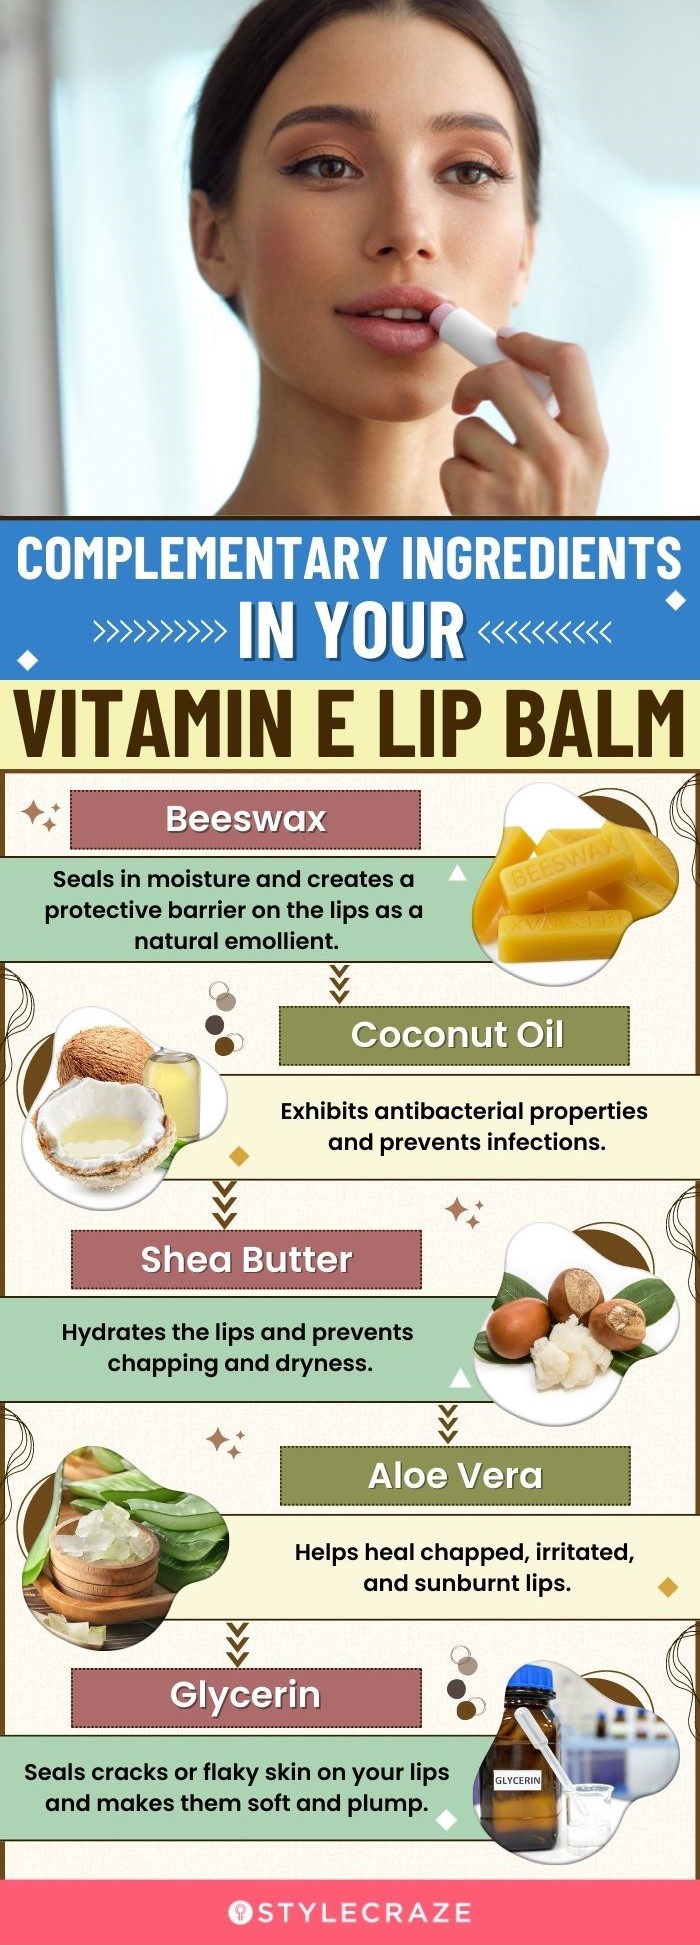 Complementary Ingredients In Your Vitamin E Lip Balm (infographic)